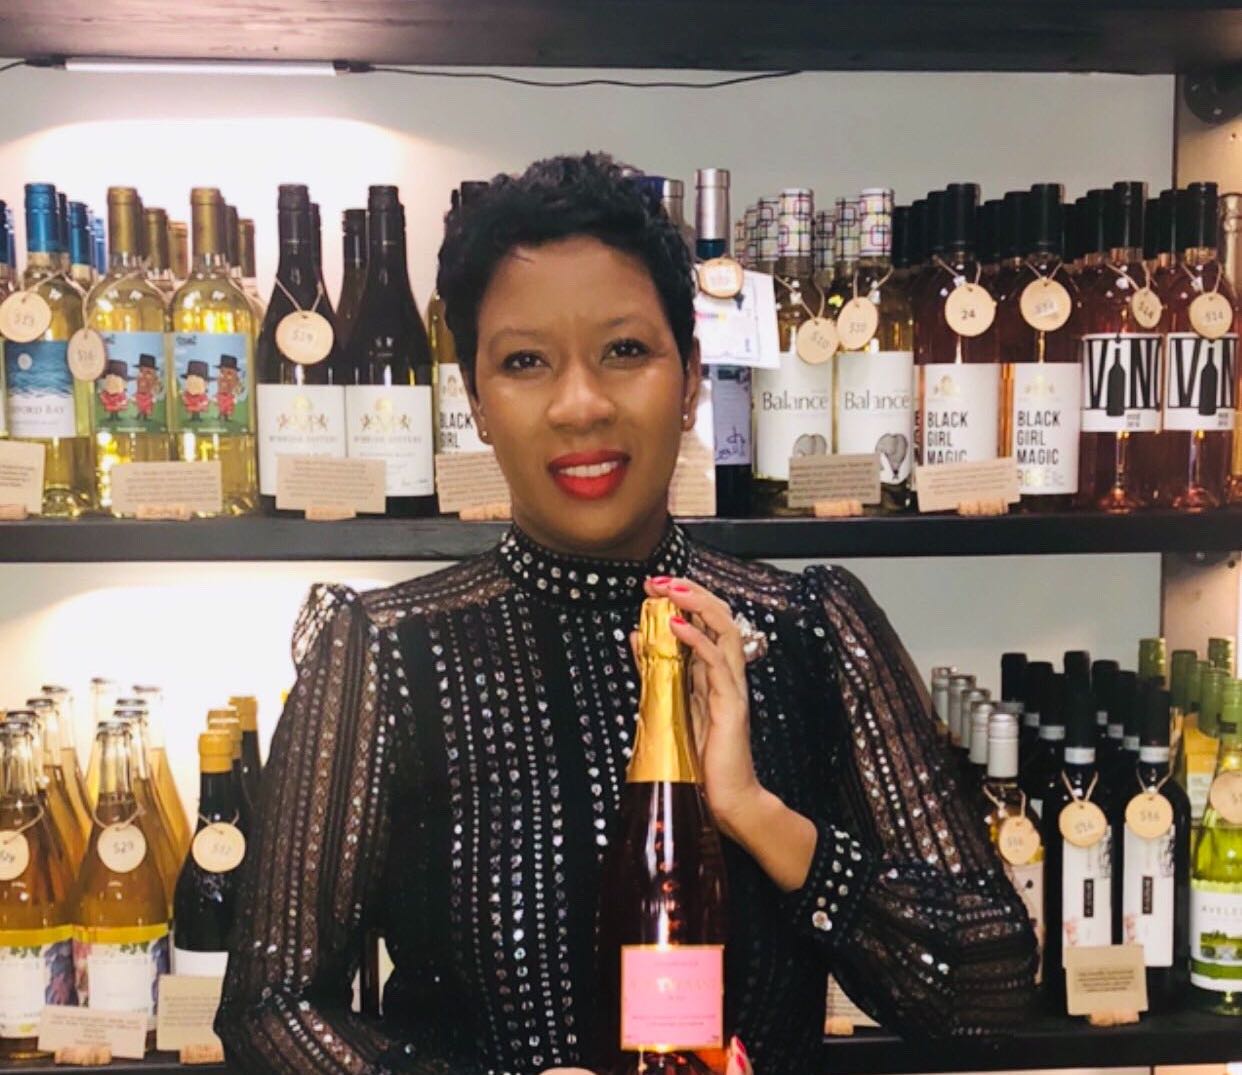 Meet The Woman Behind The Champagne Brand Paying Homage To Brooklyn